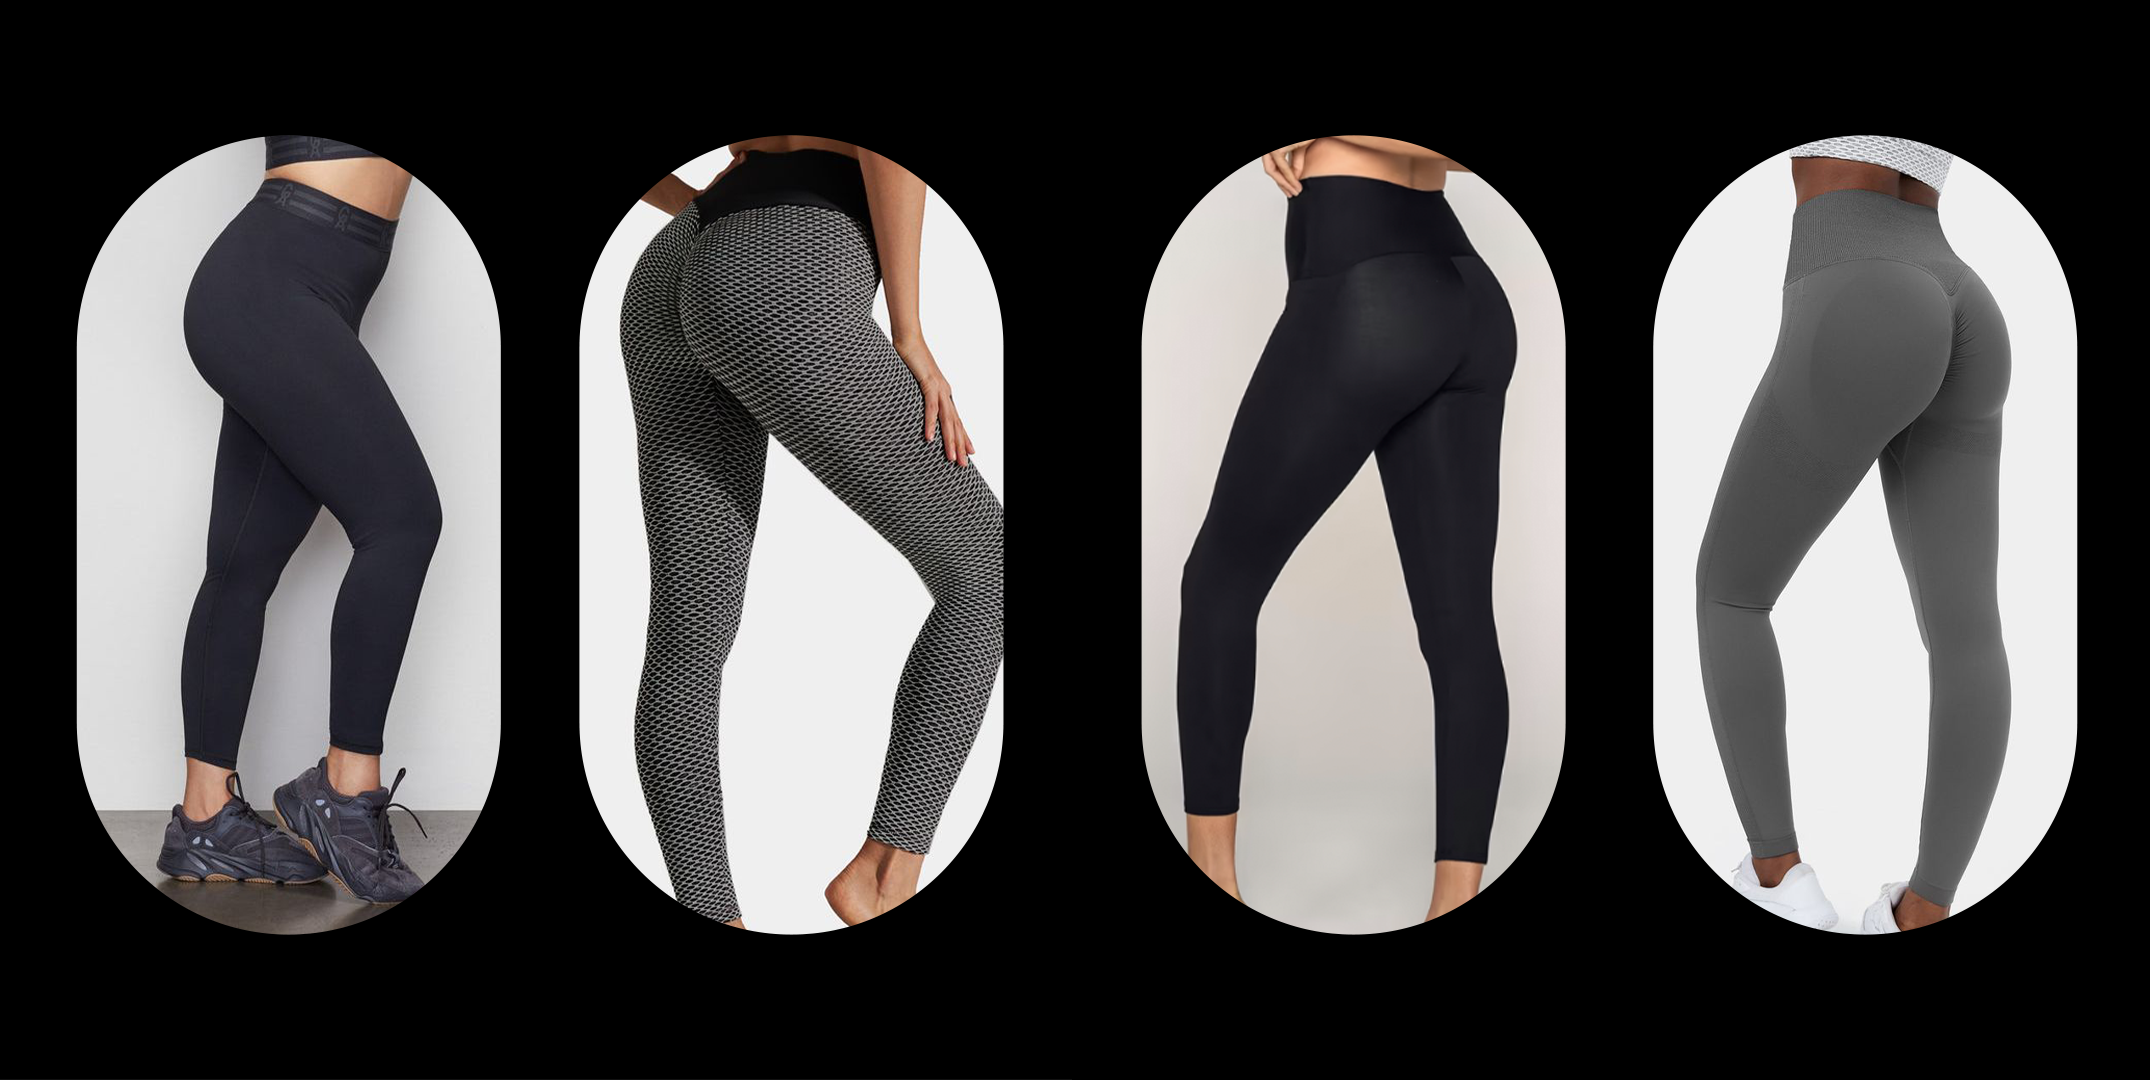 Can Workout Tights Help Me Lose Weight?